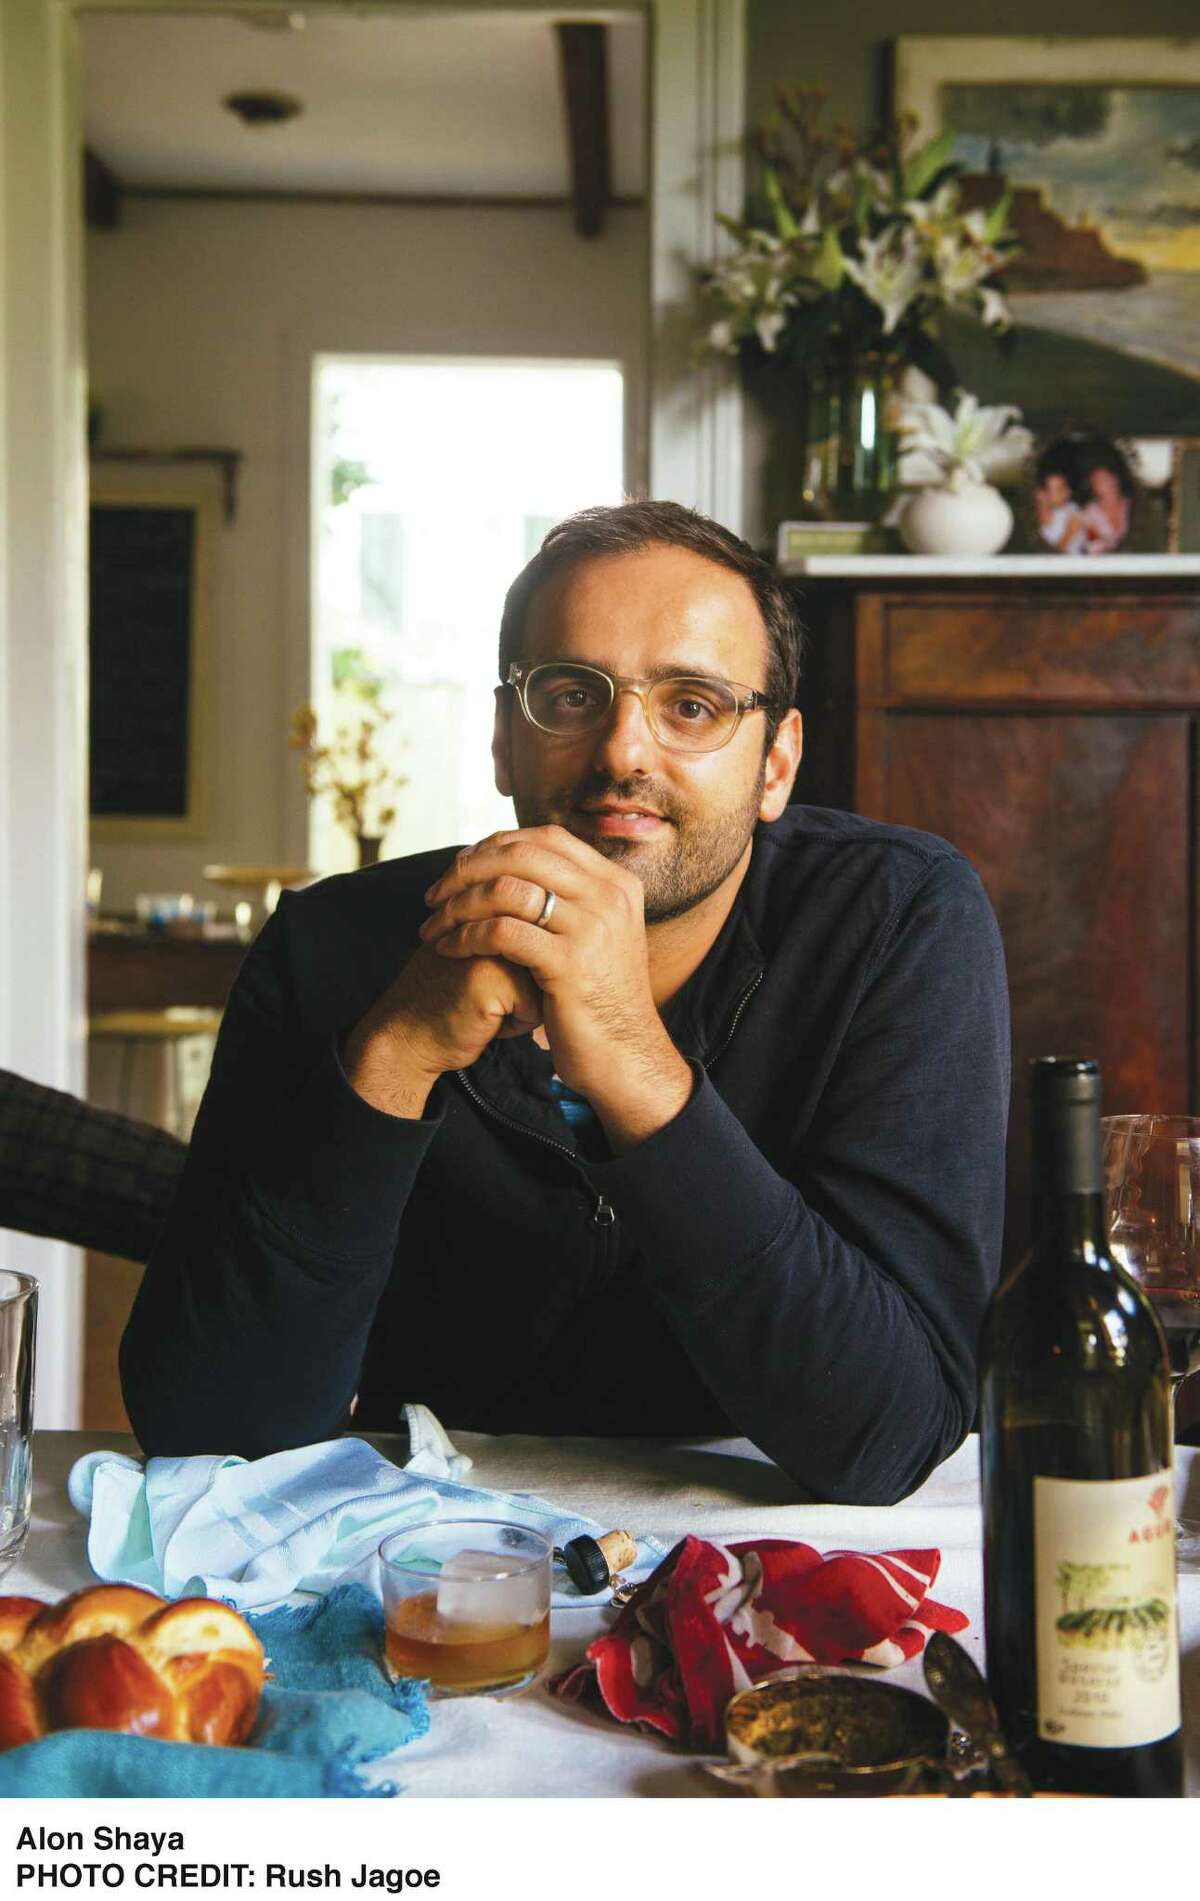 Alon Shaya is the author of "Shaya: An Odyssey of Food, My Journey Back to Israel" (Alfred A. Knopf) and the award-winning chef of Saba restaurant in New Orleans.